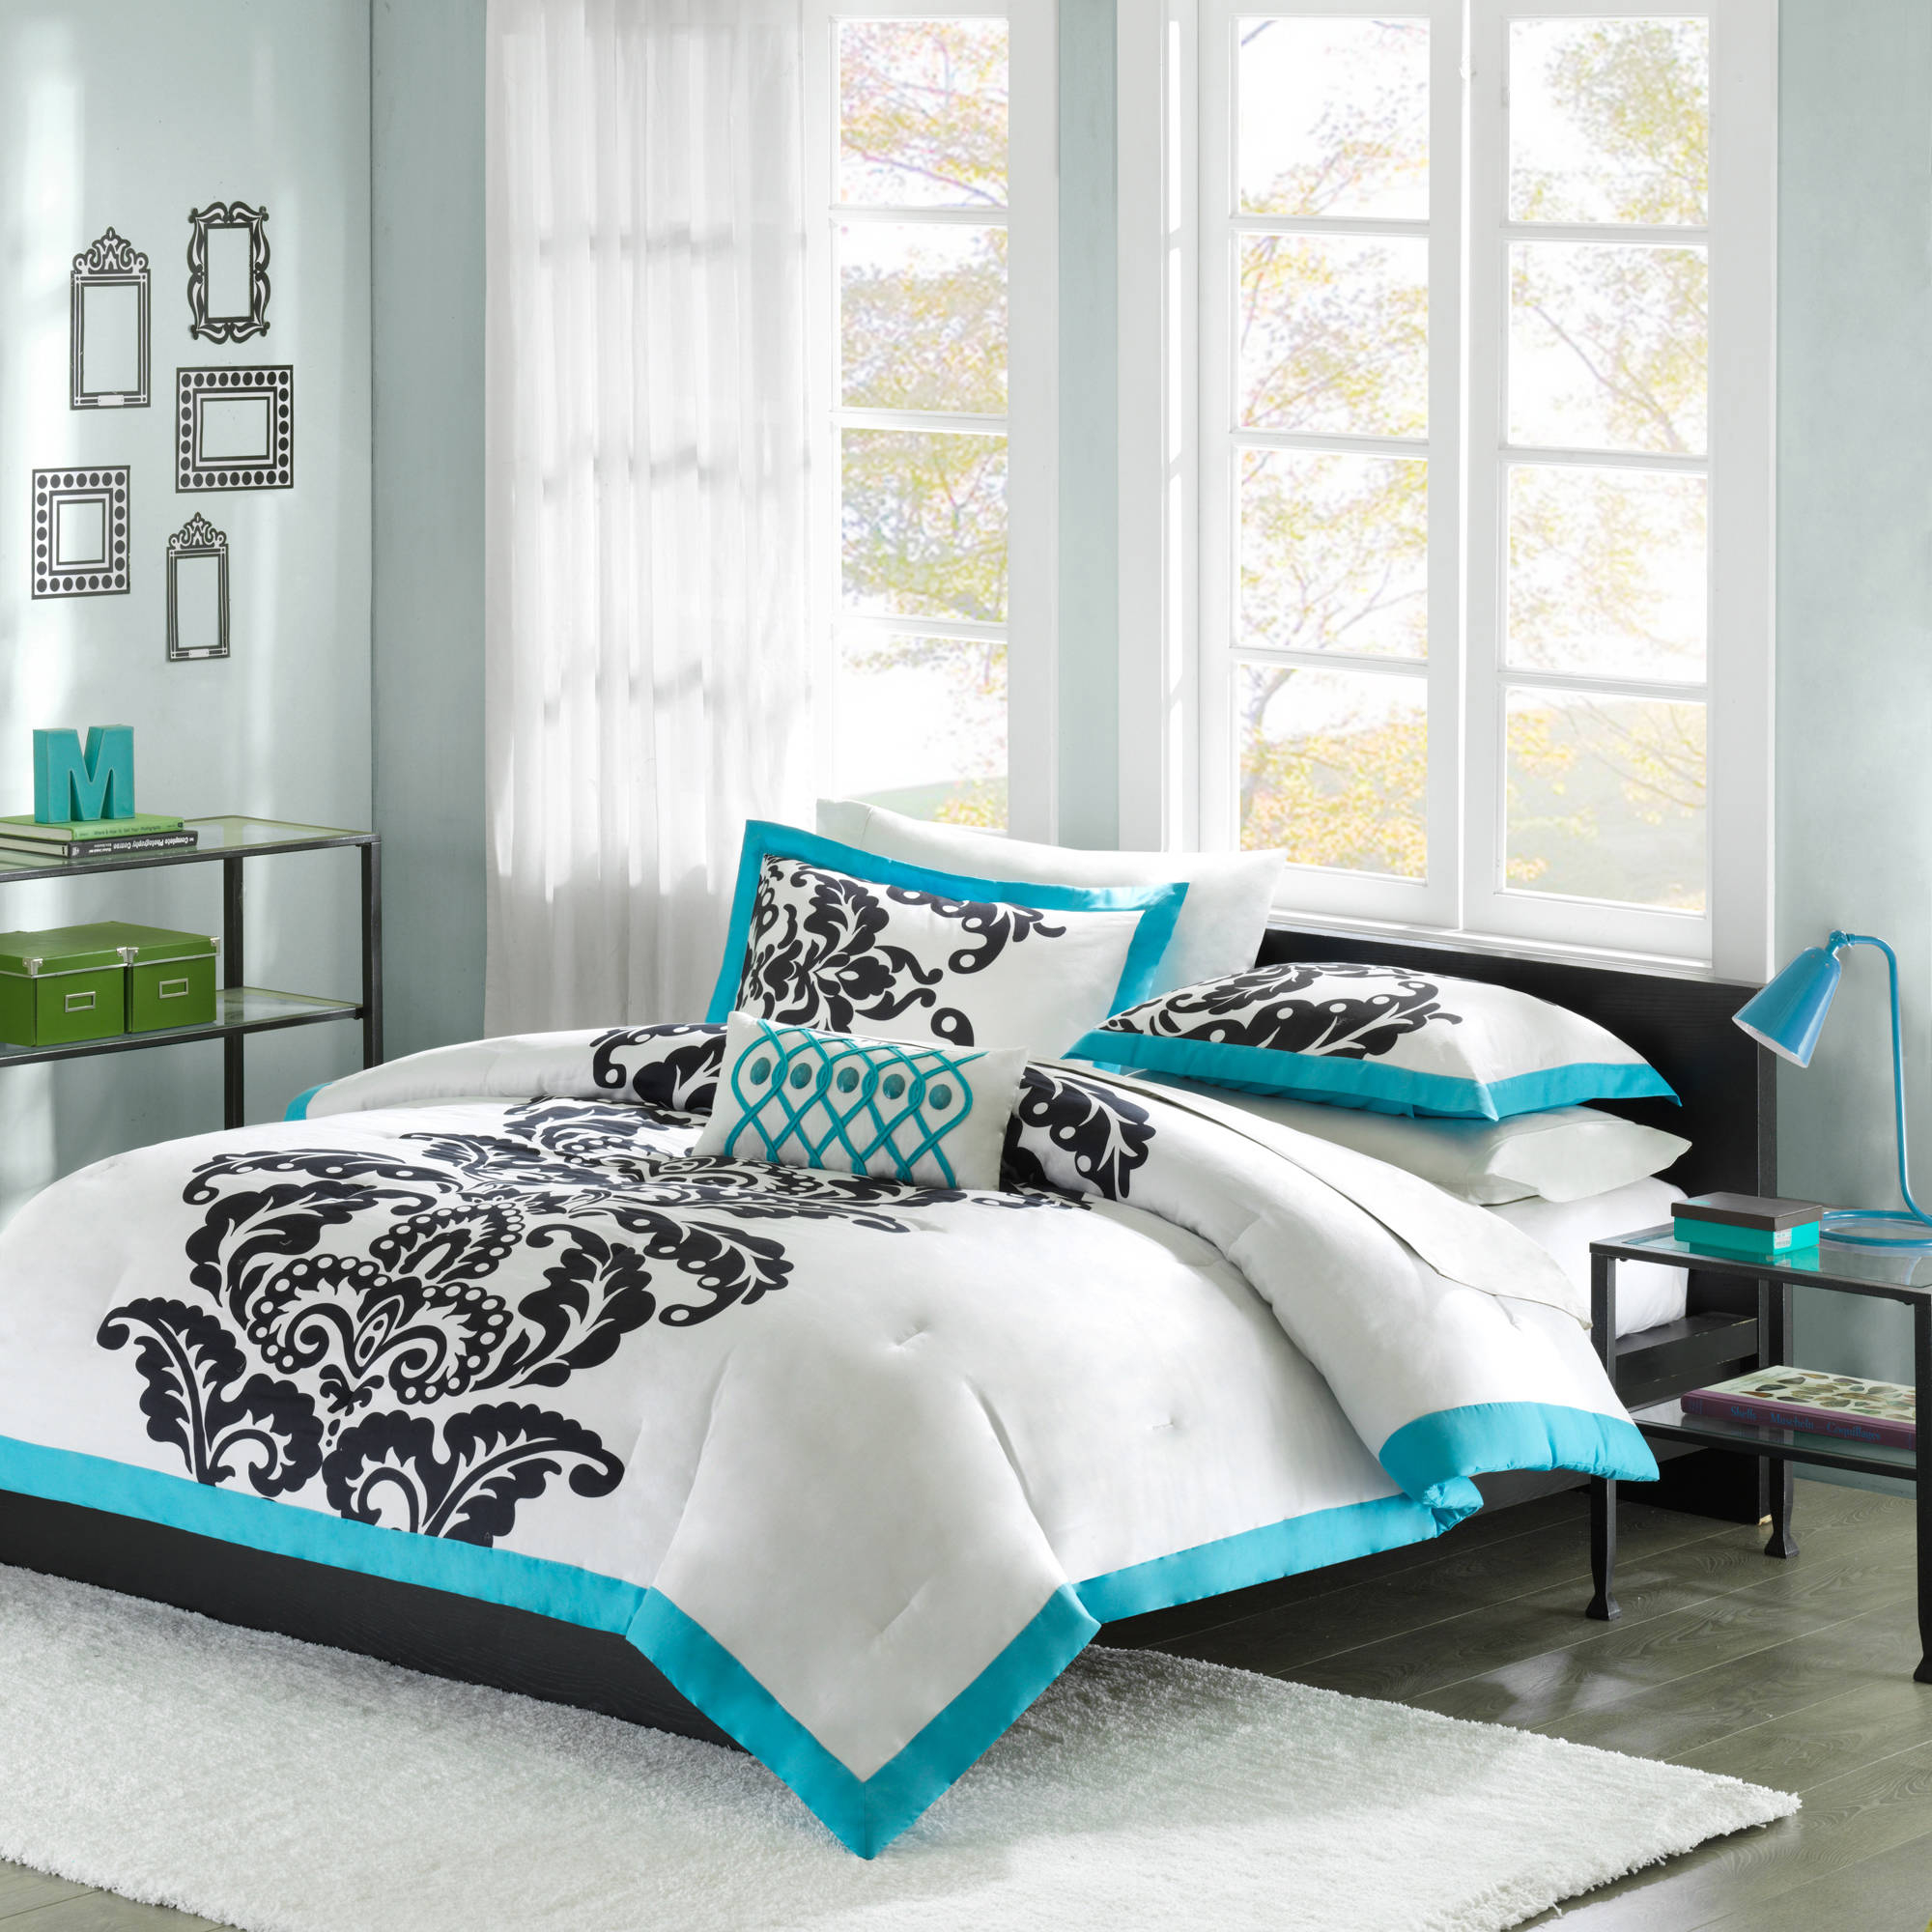 Blue and black bedding